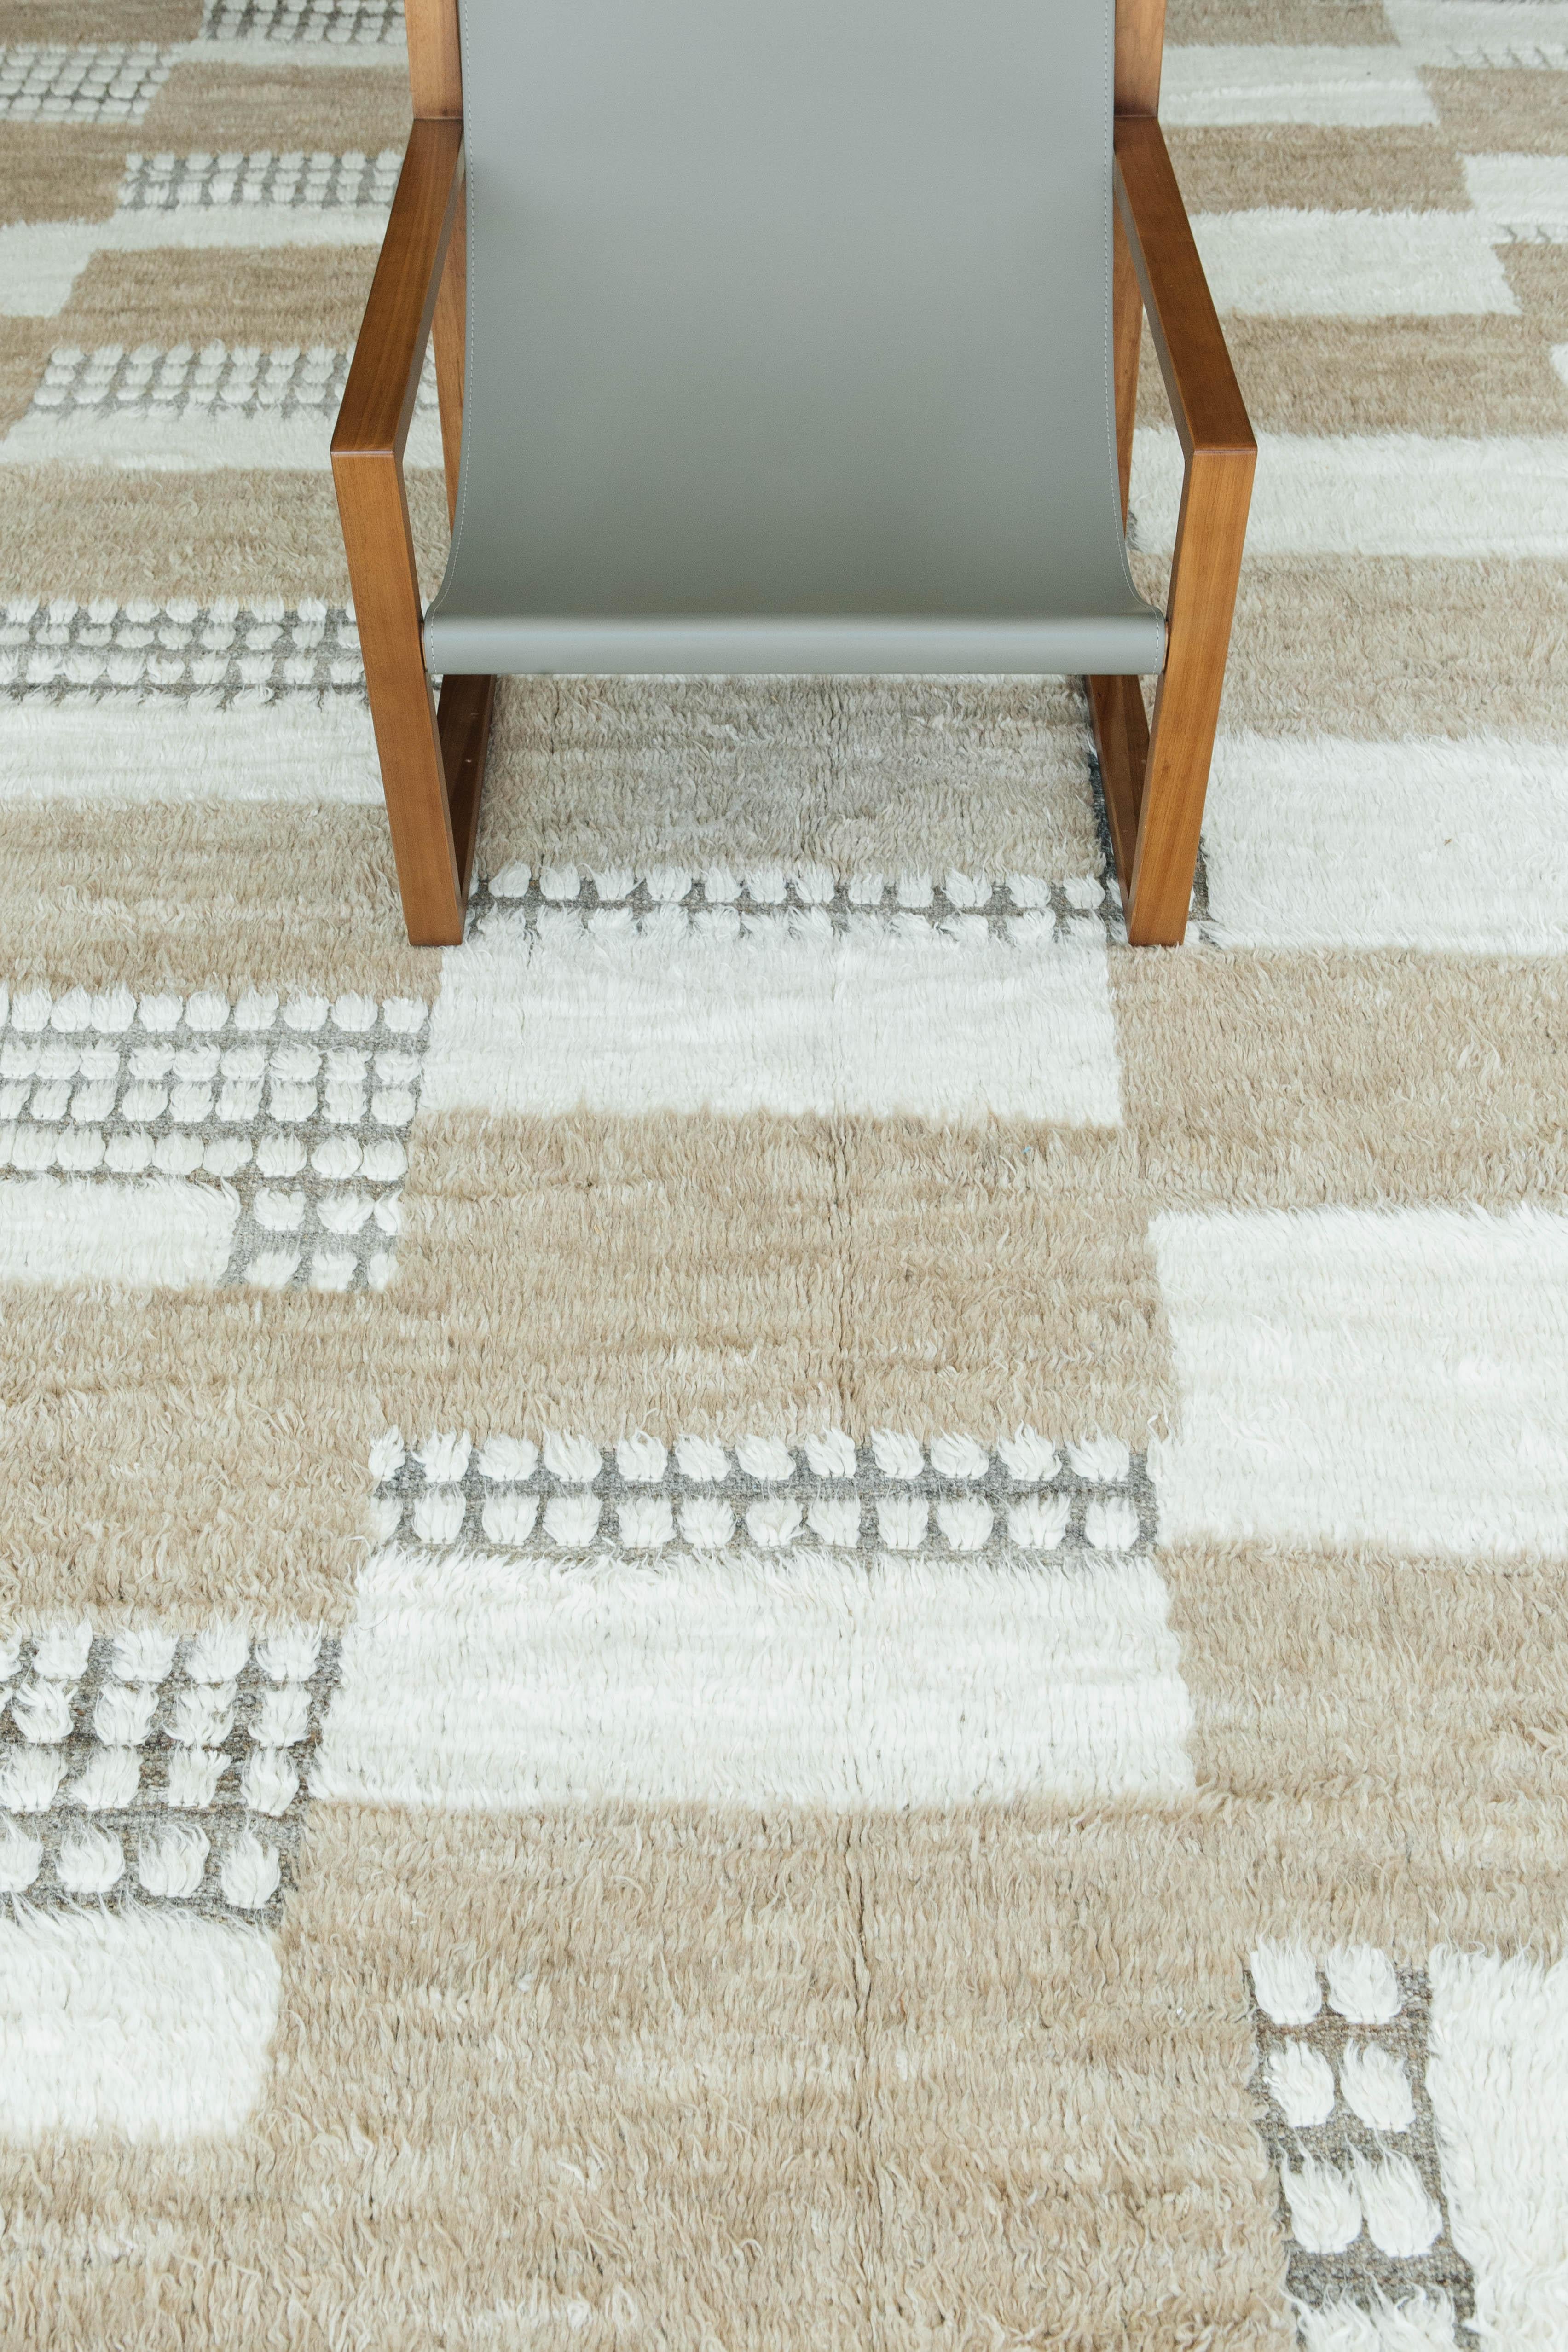 Shahmaran is a color blocking and checkered hand knotted rug that brings movement and light to the space. The design is created with embossed detailing through the low shag pile. Inspired by Scandinavian design elements and designed in Los Angles